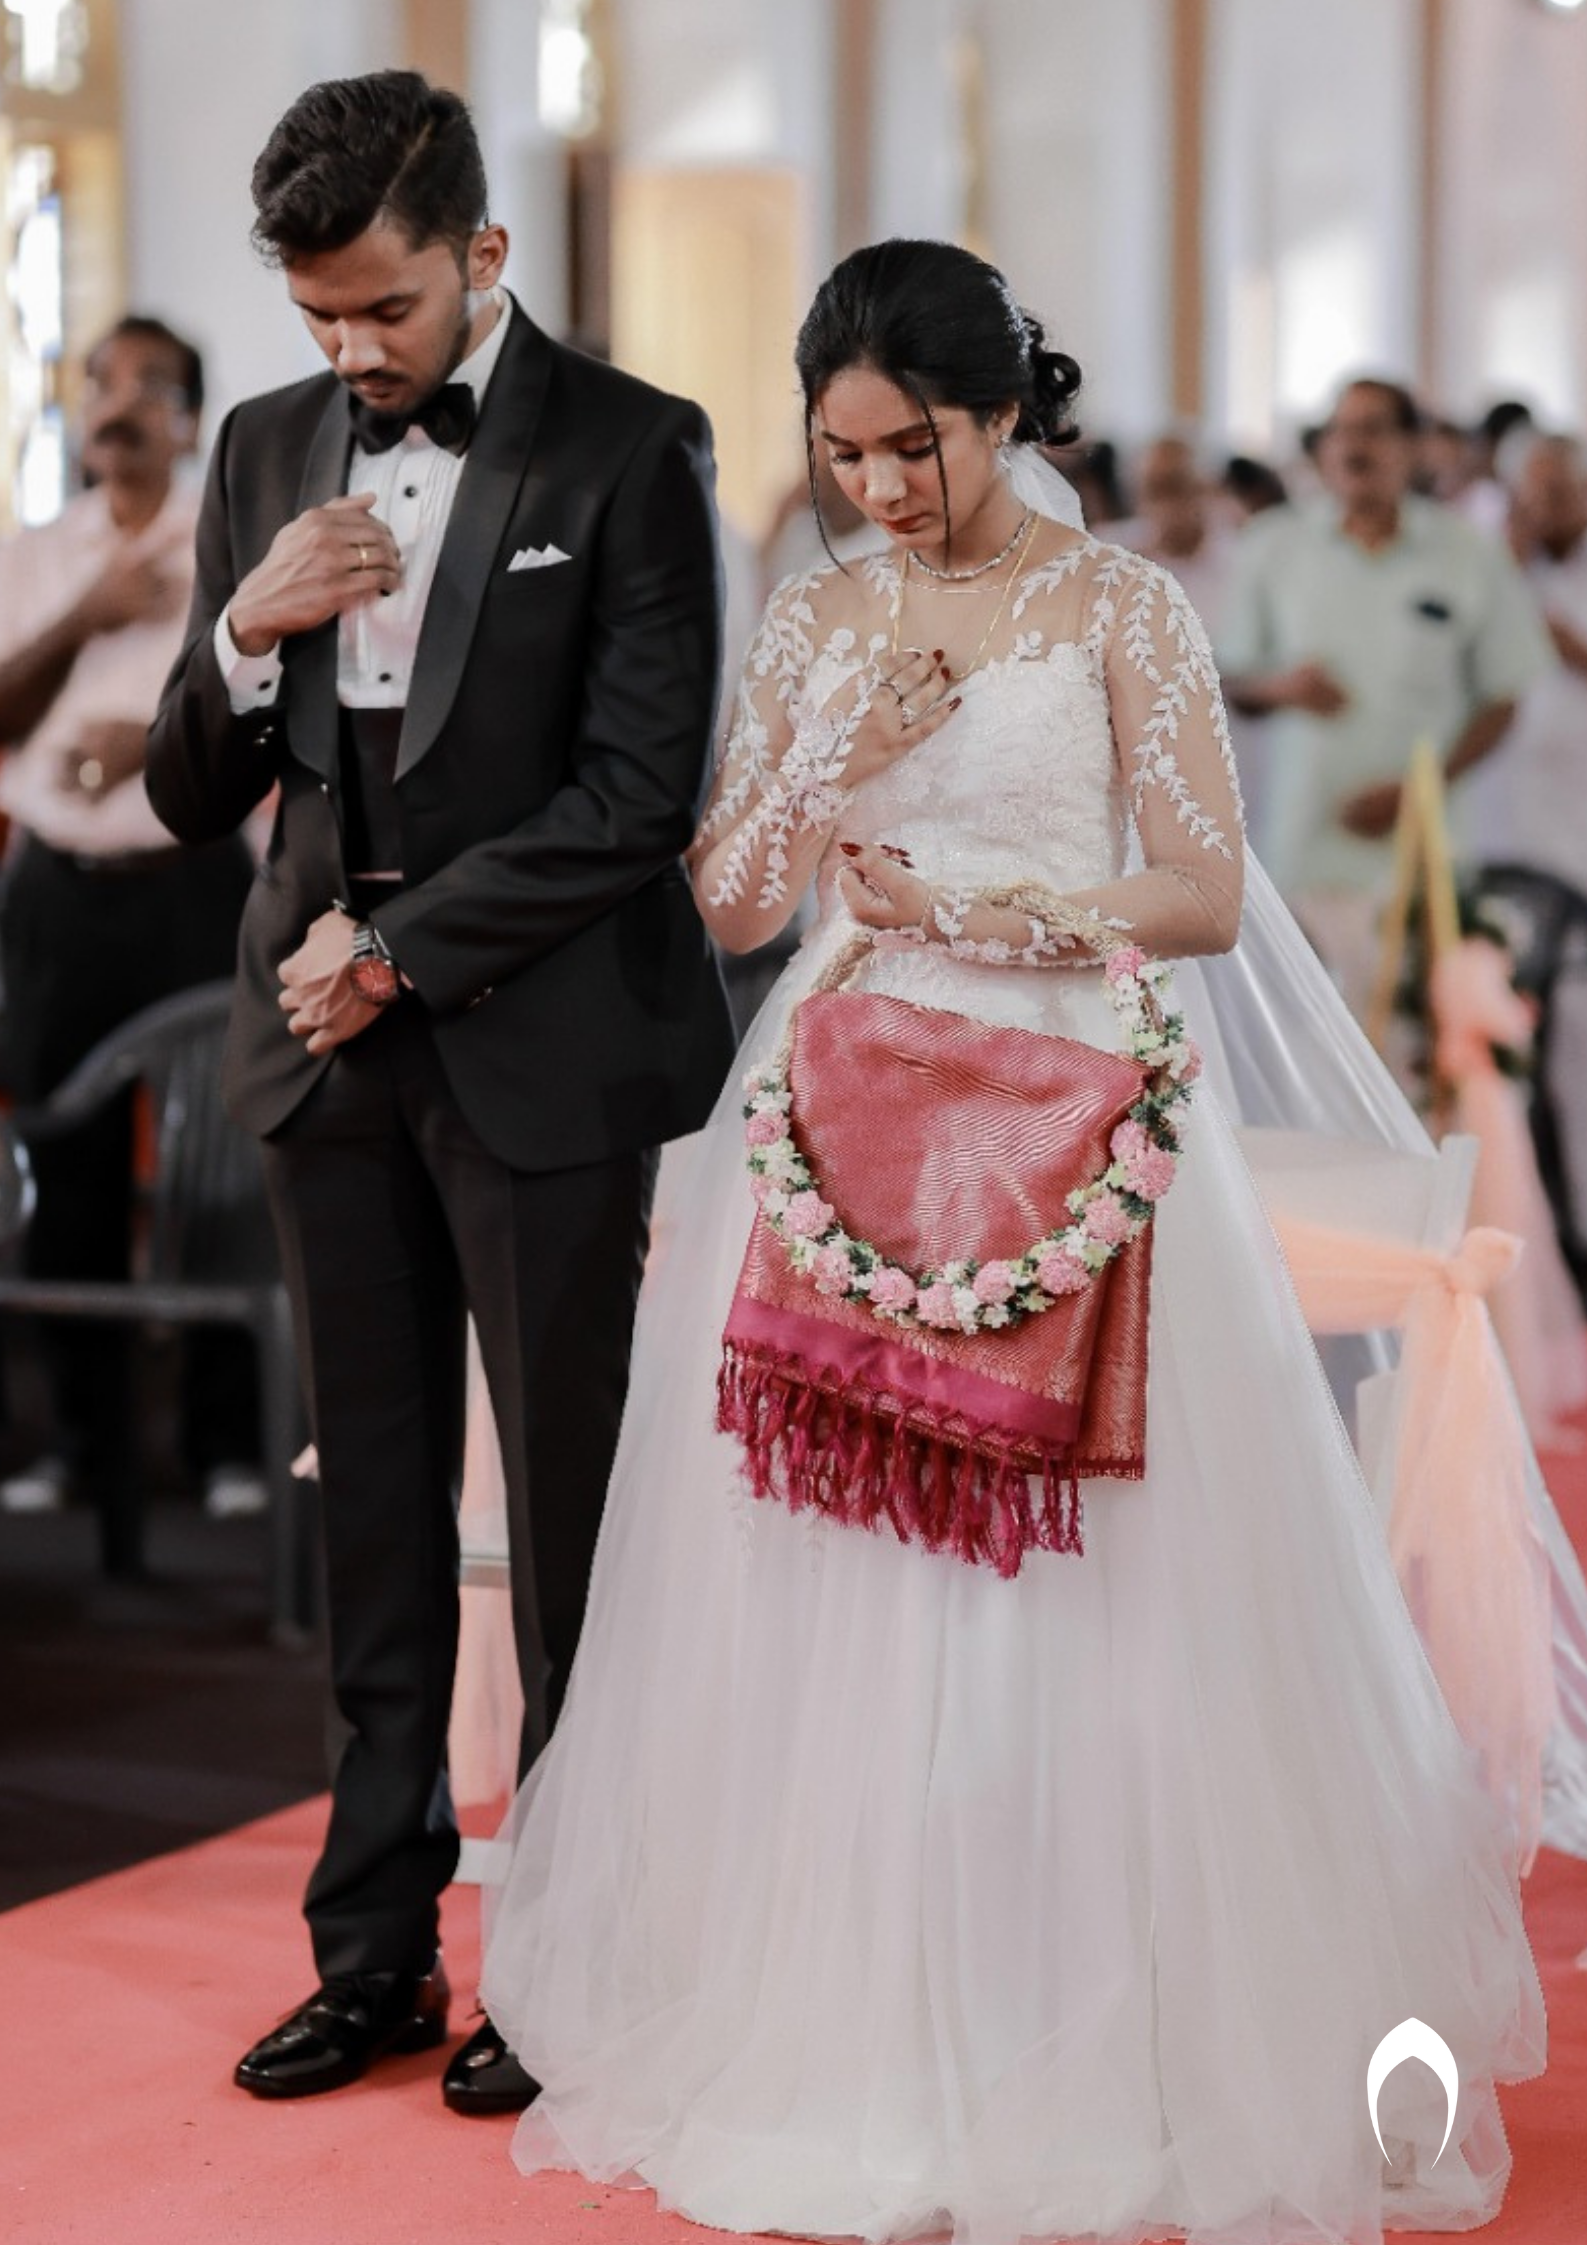 A Modern Wedding With The Bride In A Minimal White Lehenga | Indian wedding  outfit bride, Minimal wedding dress, Bridal outfits